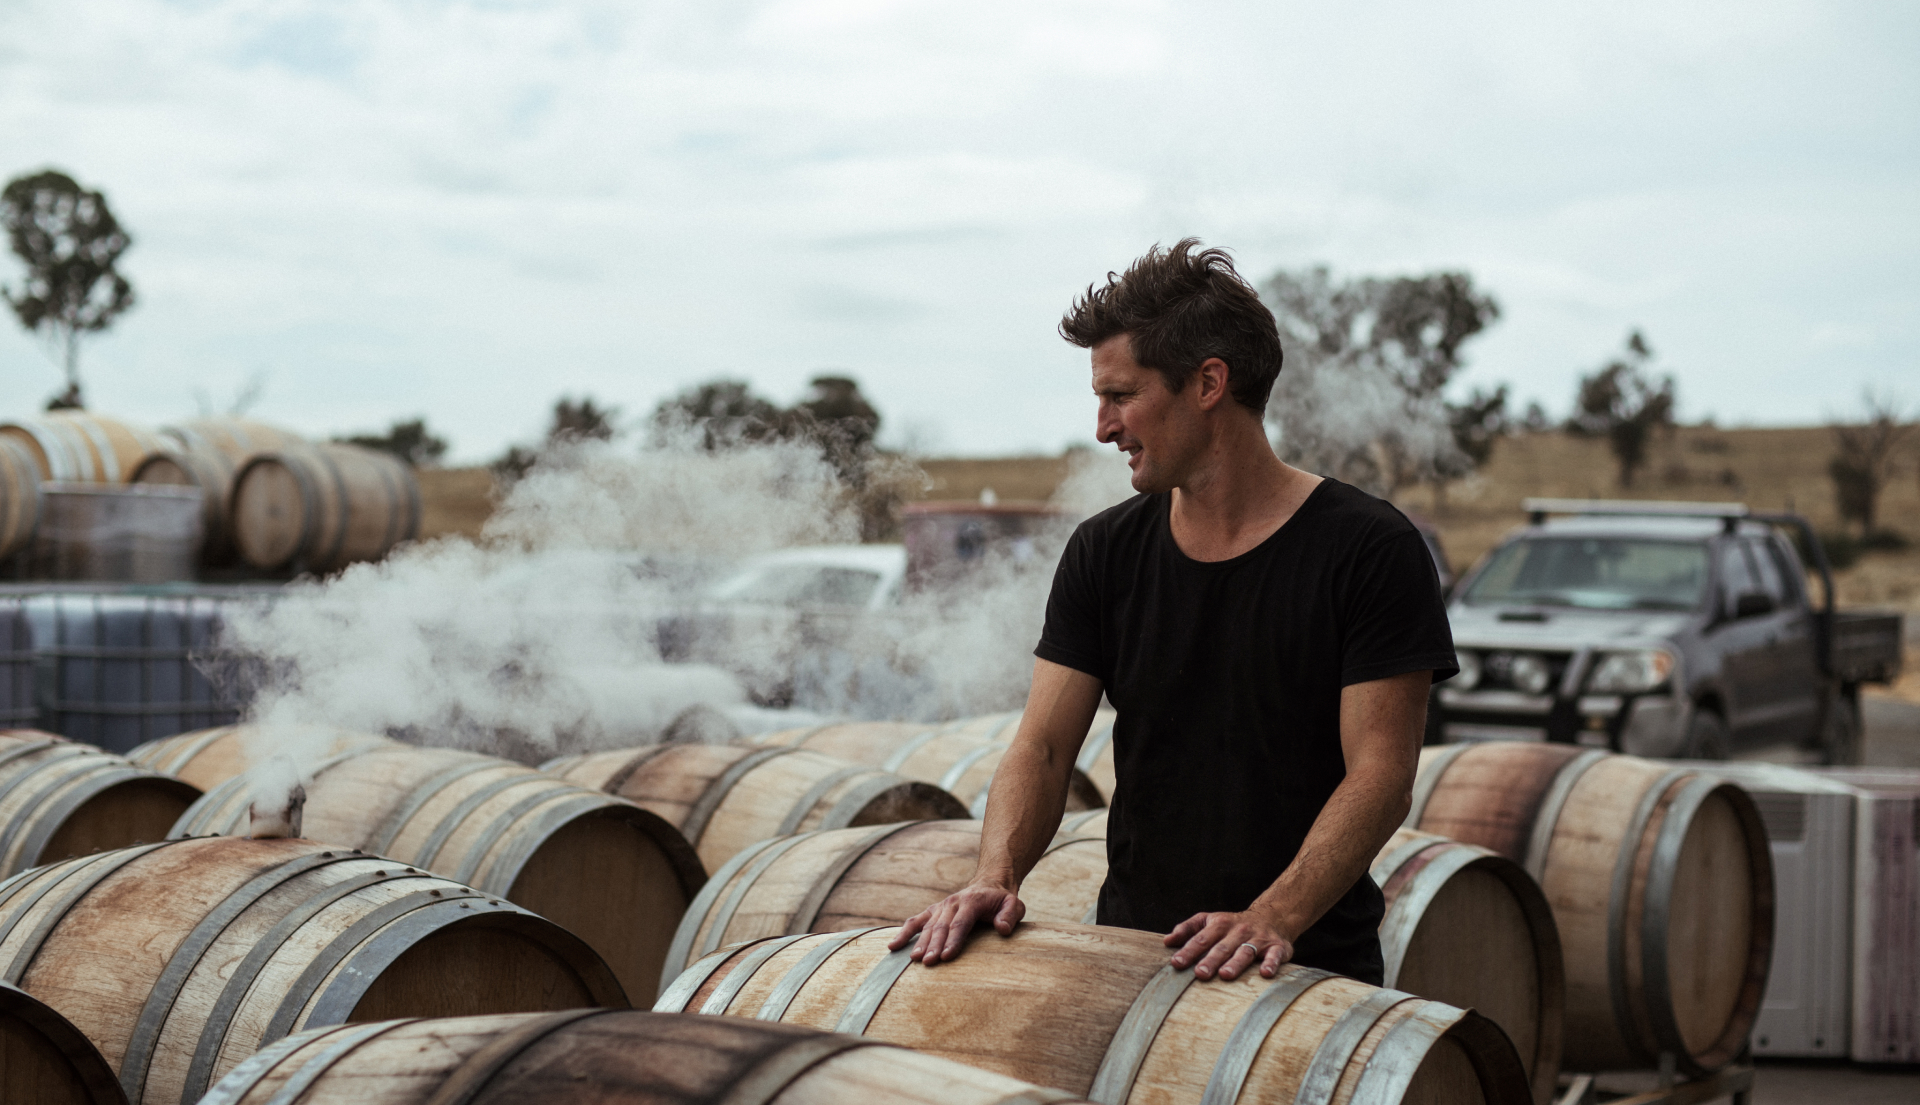 Winemaker standing outside amongst wine barrels that are being steamed.